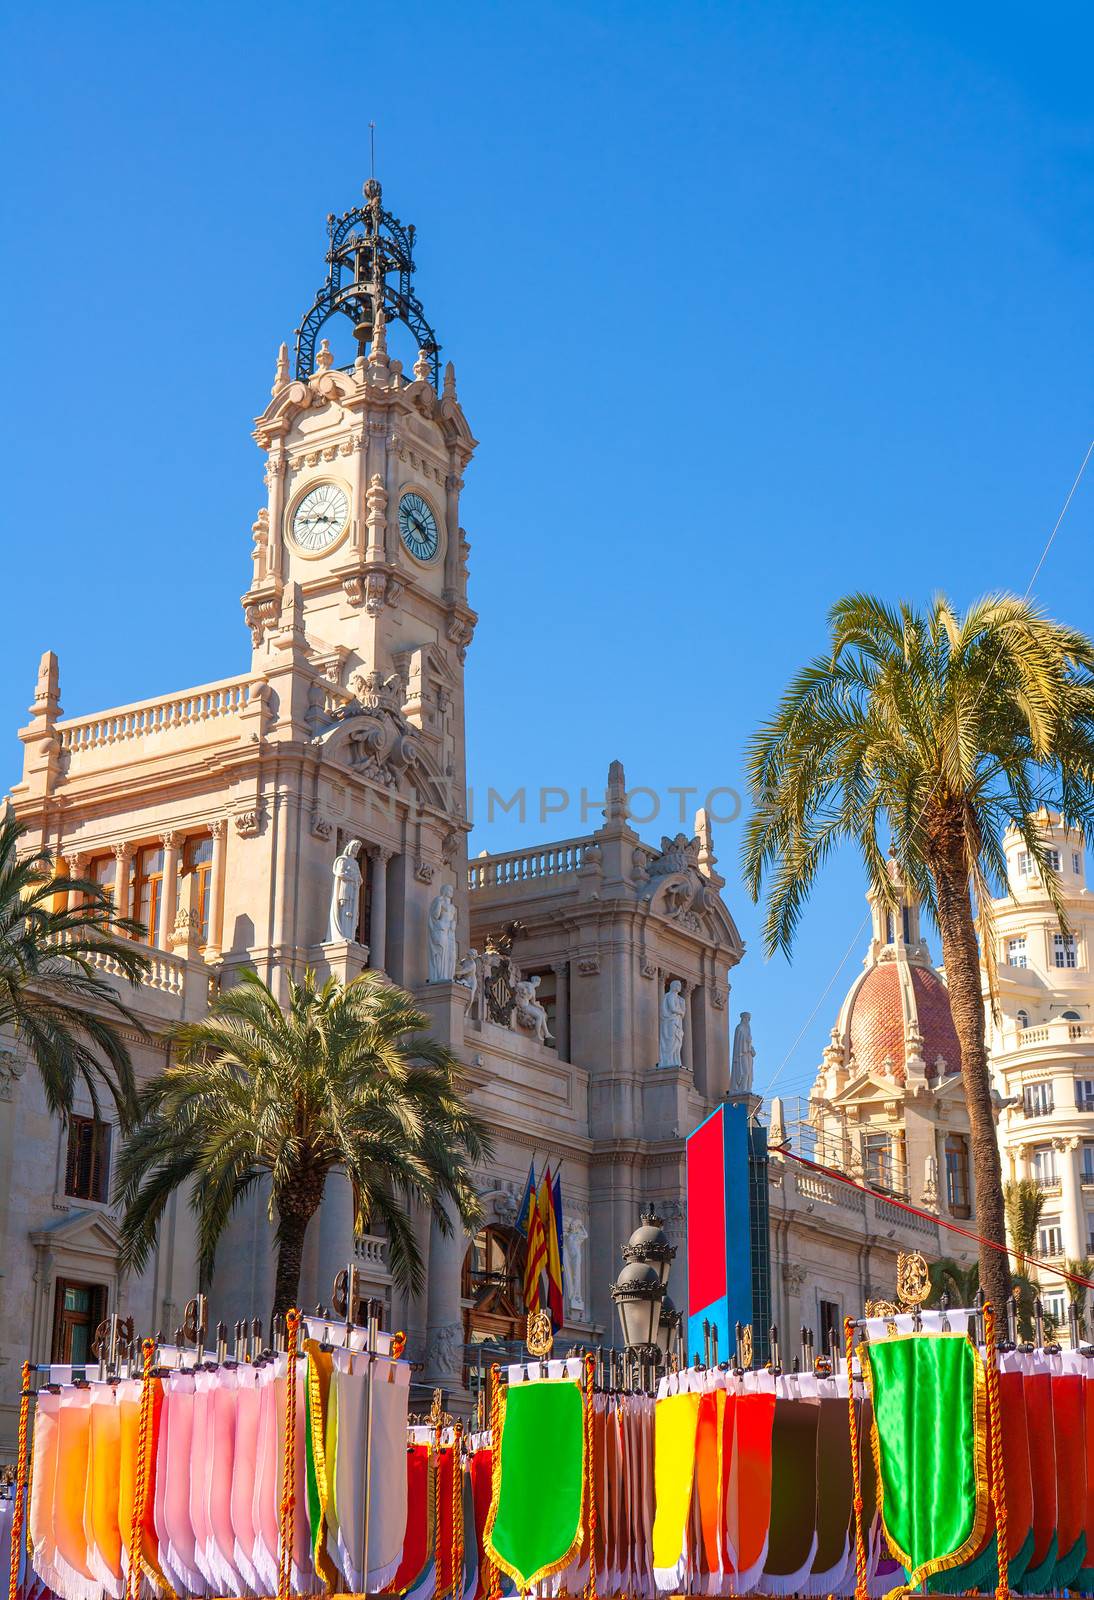 Valencia Ayuntamiento city town hall with fallas colorful flags in spain